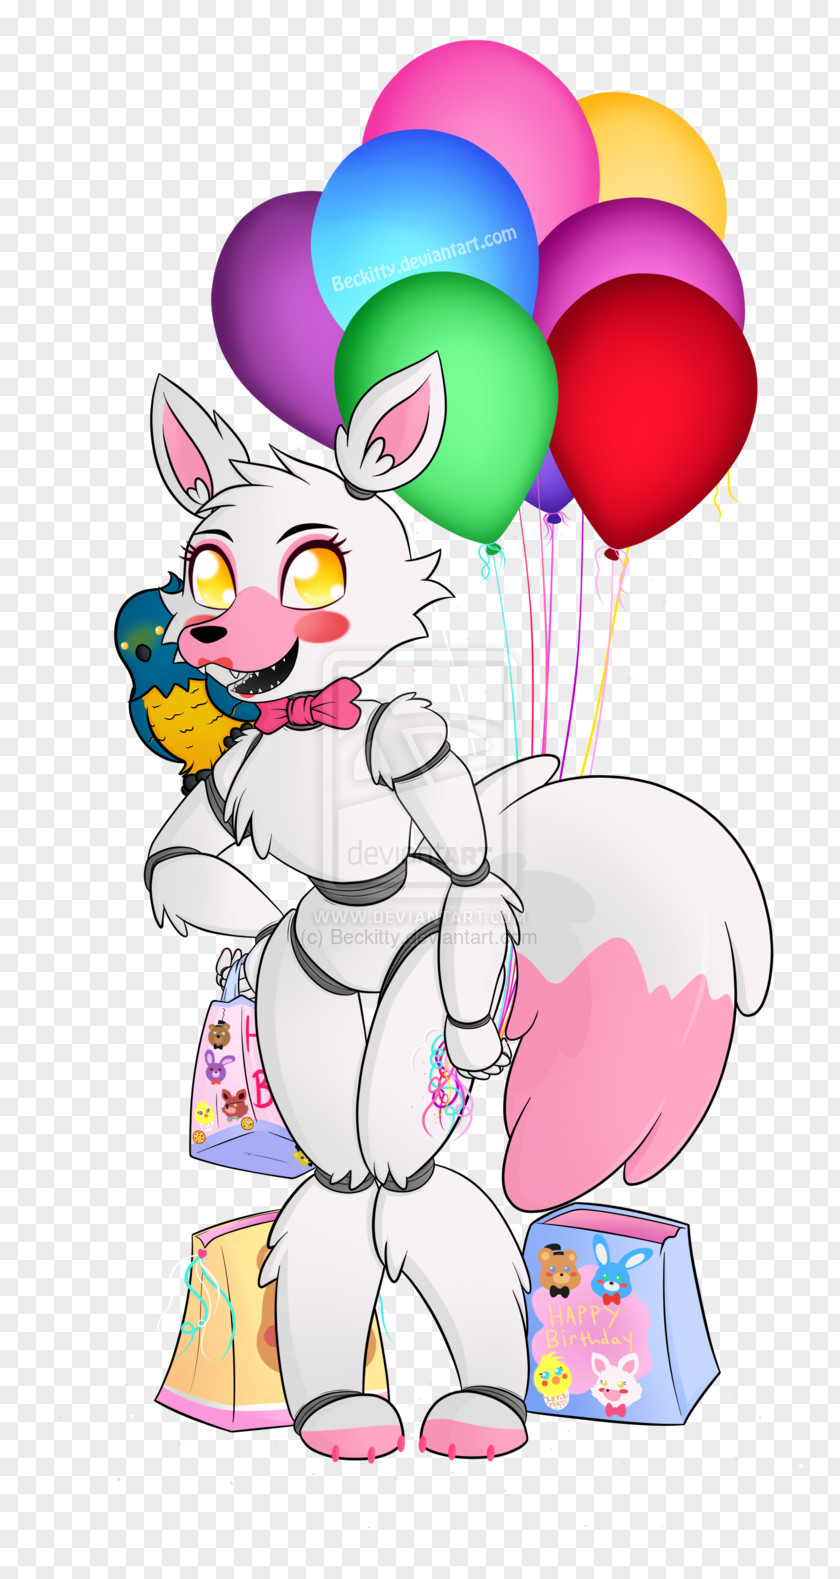 Happy Birthday Cake Party Five Nights At Freddy's 2 PNG